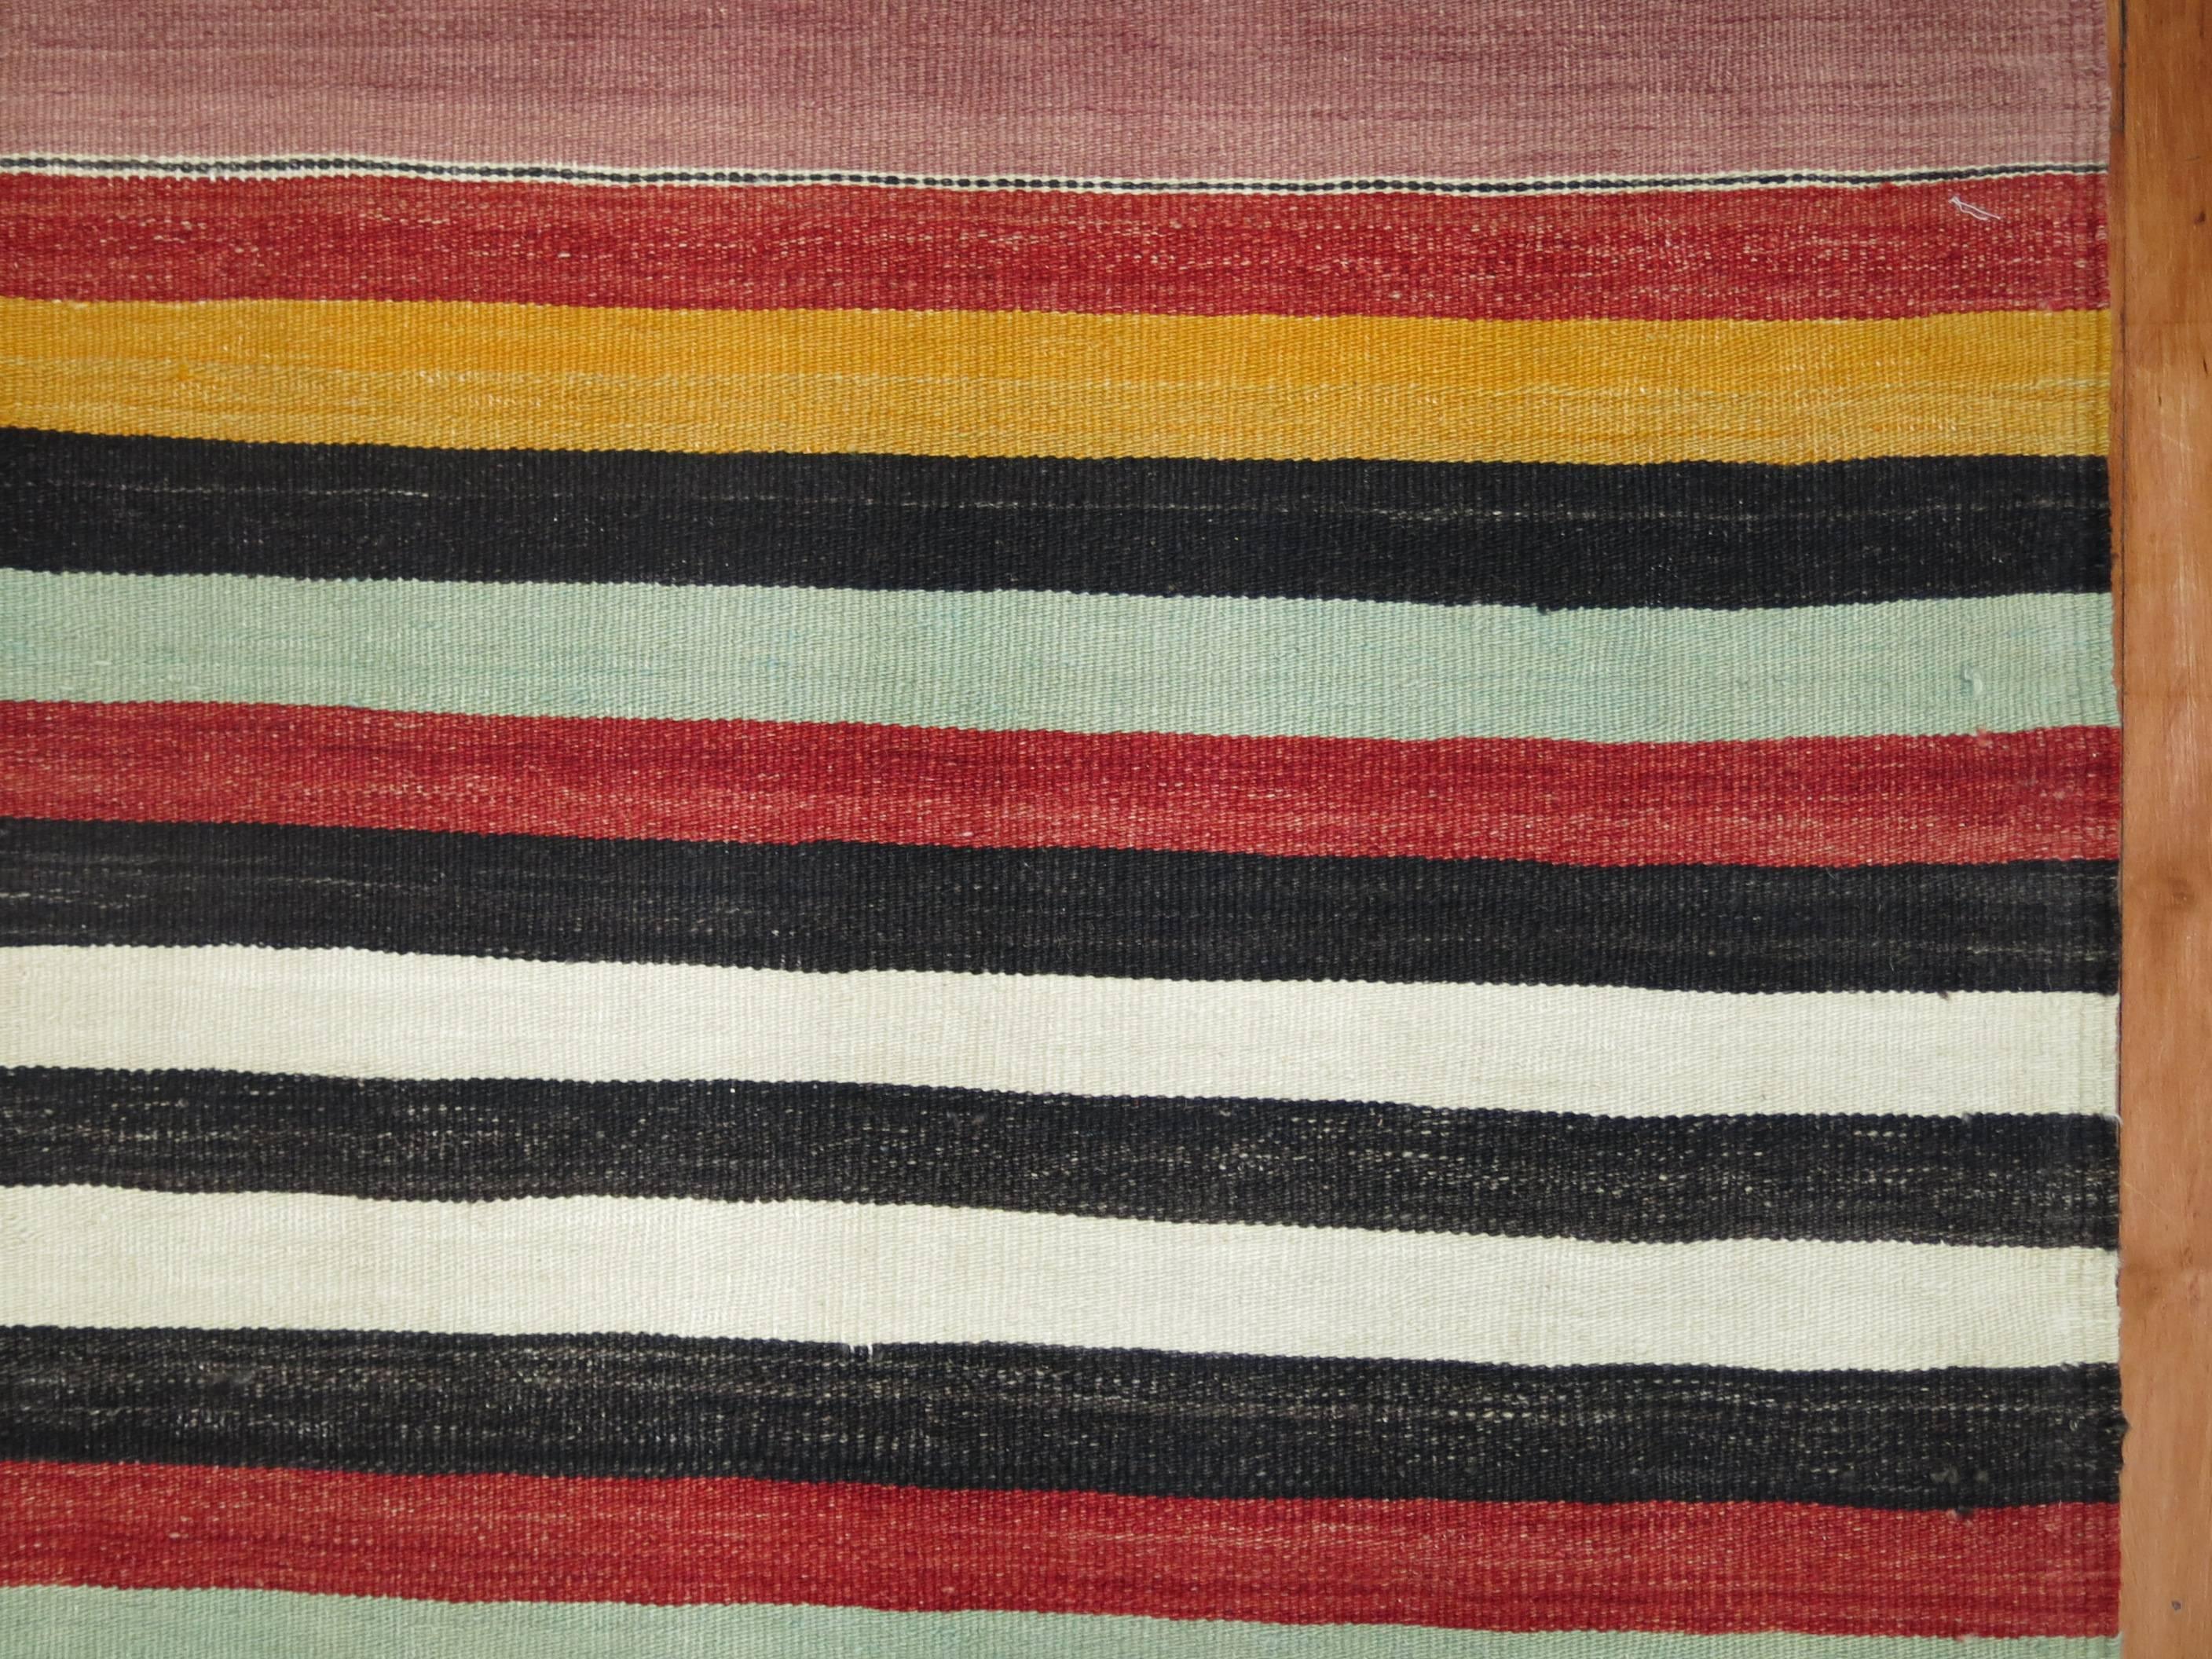 An intermediate size vintage Turkish Kilim with a colorful striped design throughout, circa mid-20th century.

Measures: 6' x 9'9